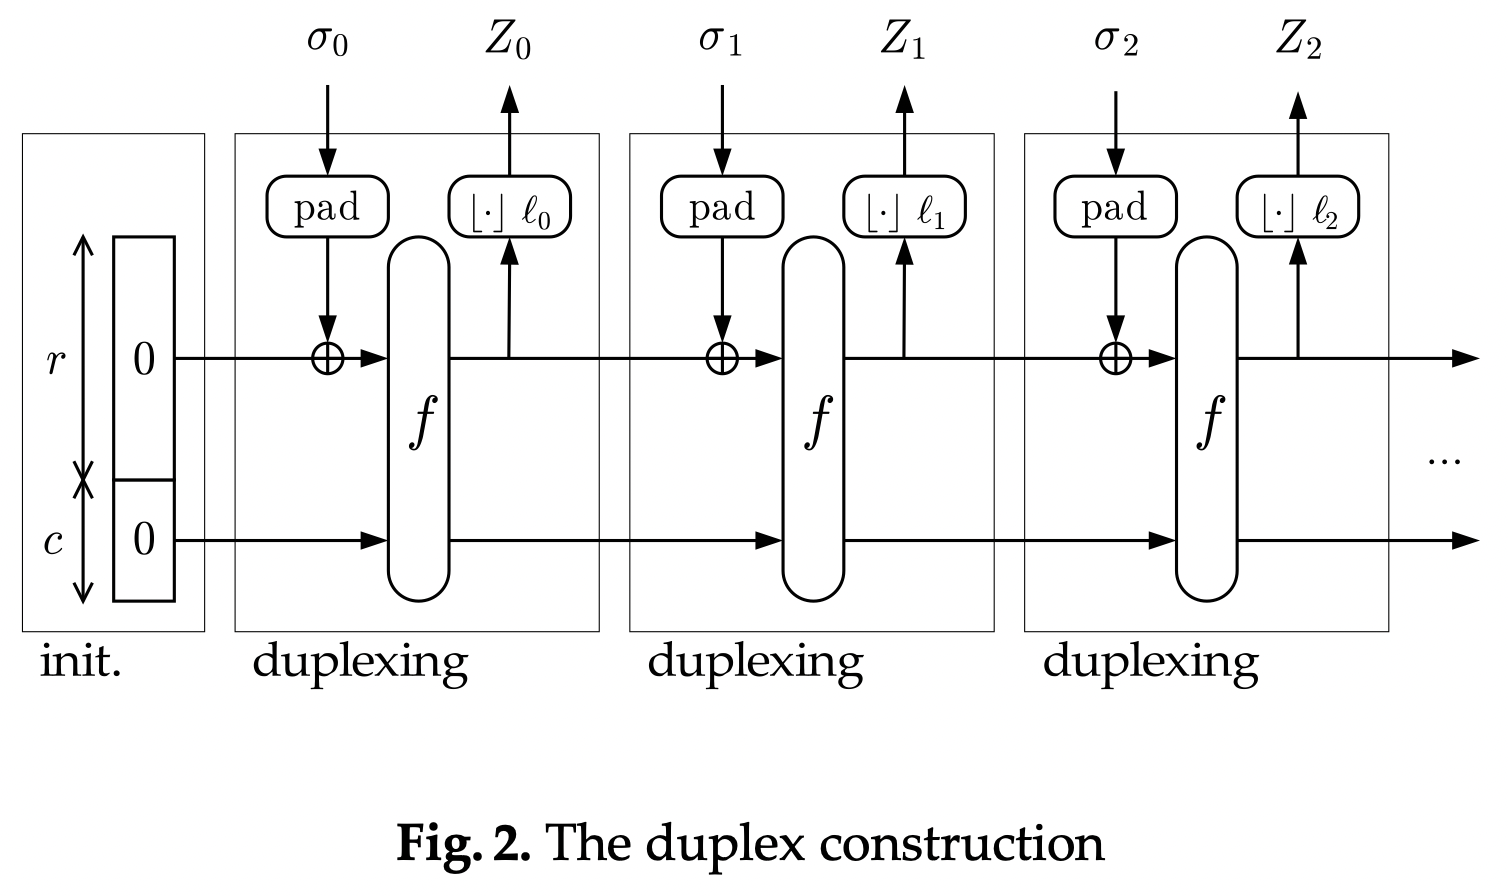 A visualization of the duplex construction